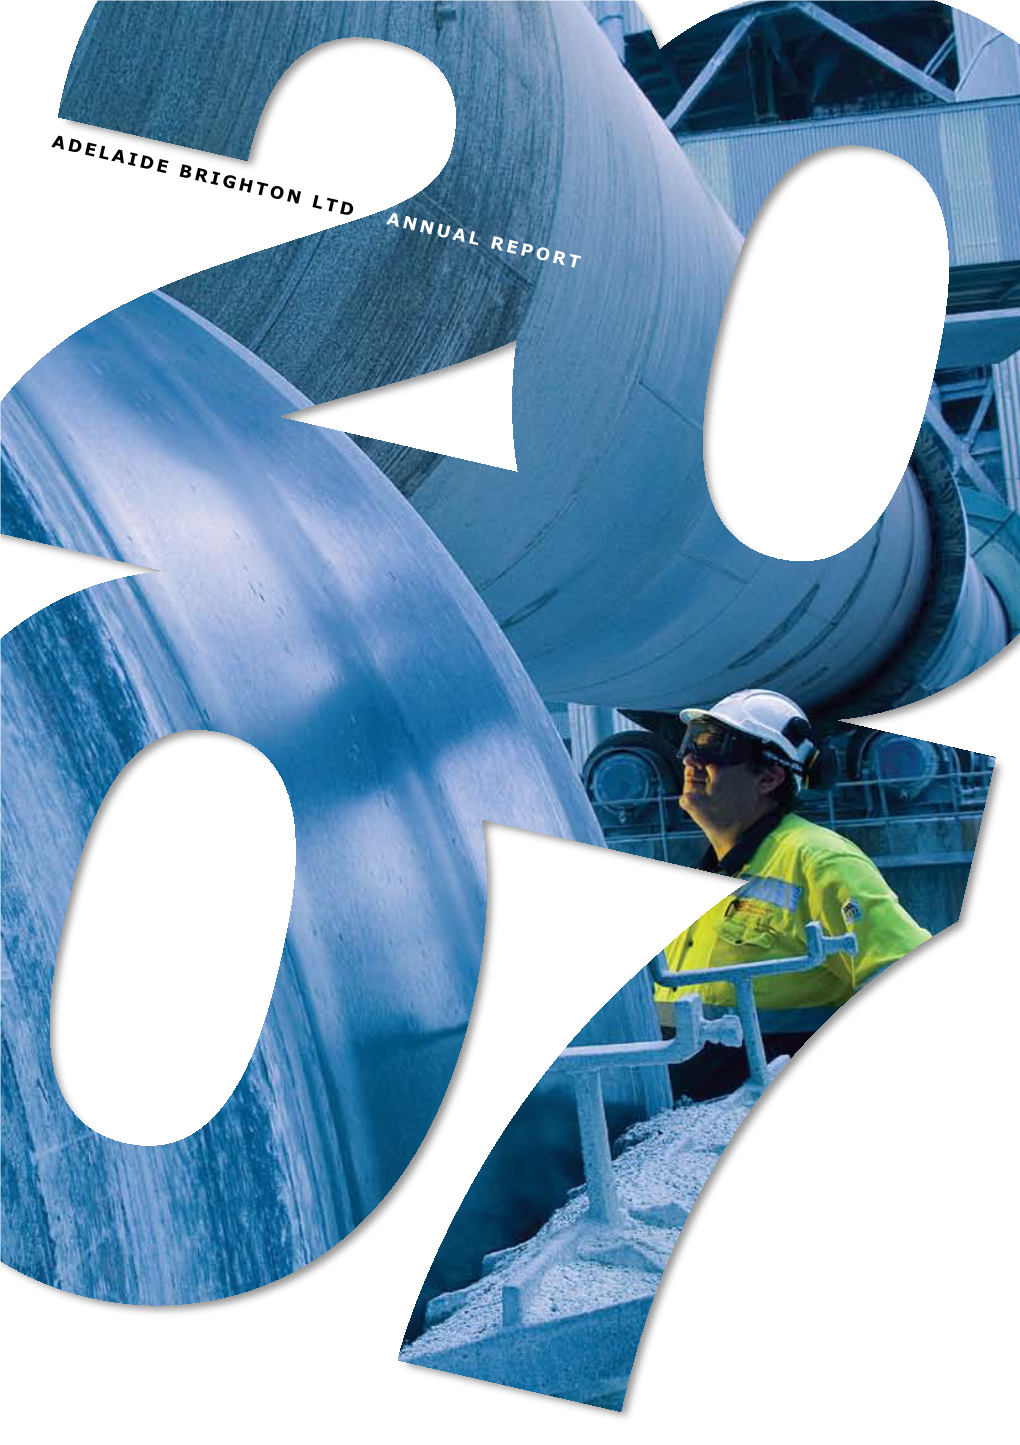 ADELAIDE BRIGHTON LTD ANNUAL REPORT 2007 Reported Under AIRFS CHAIRMAN’S REPORT